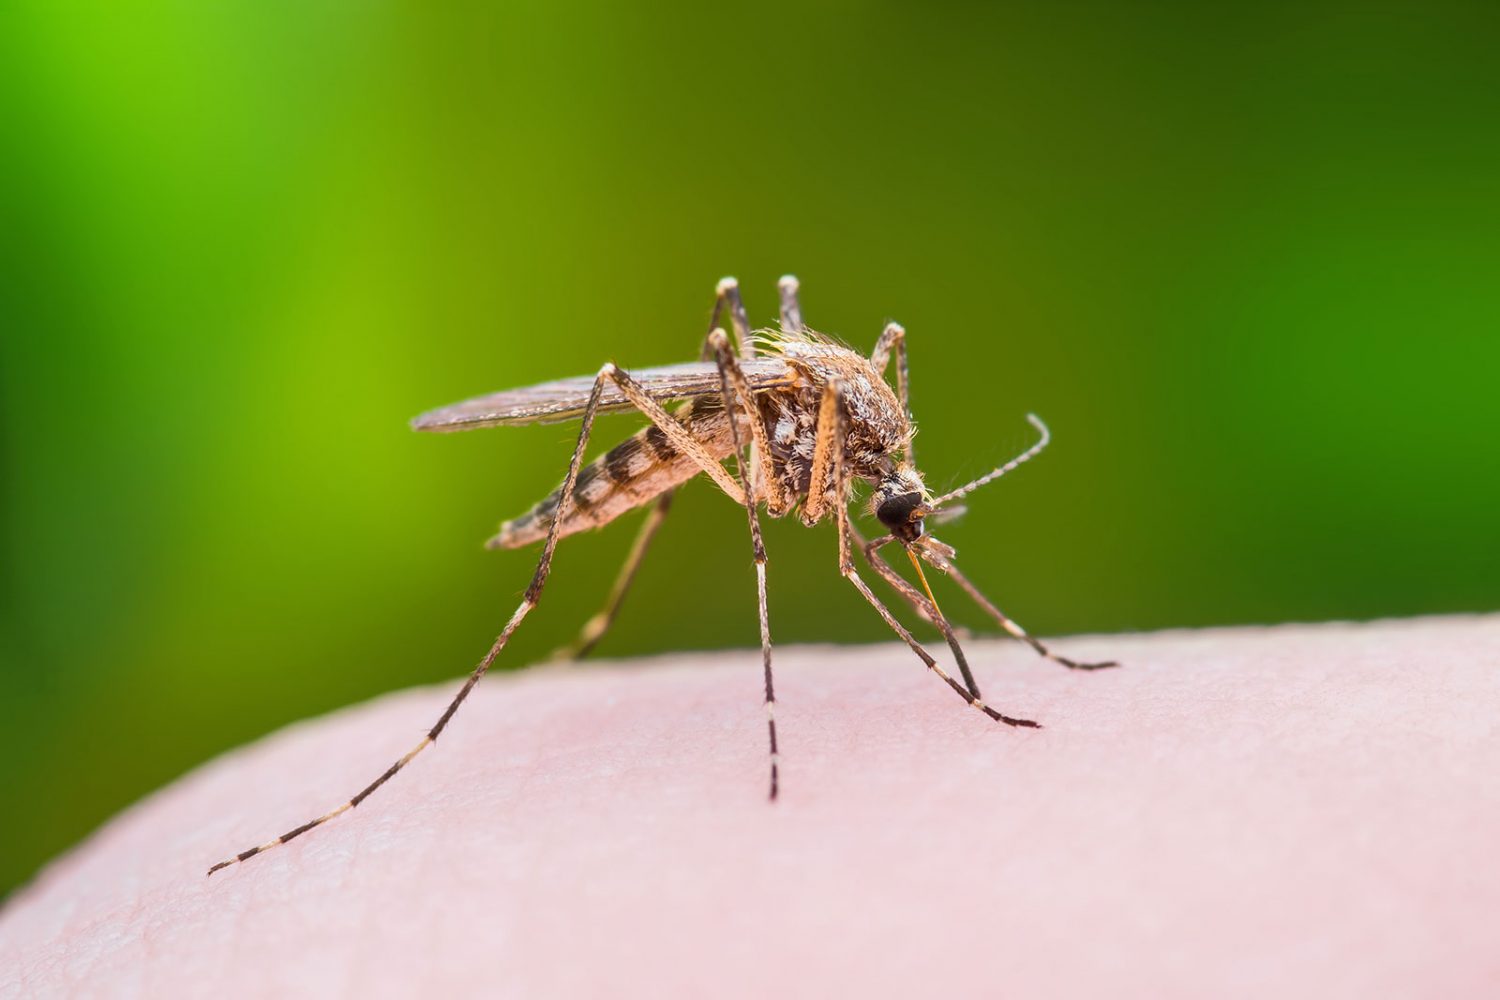 Mosquito on a person's arm